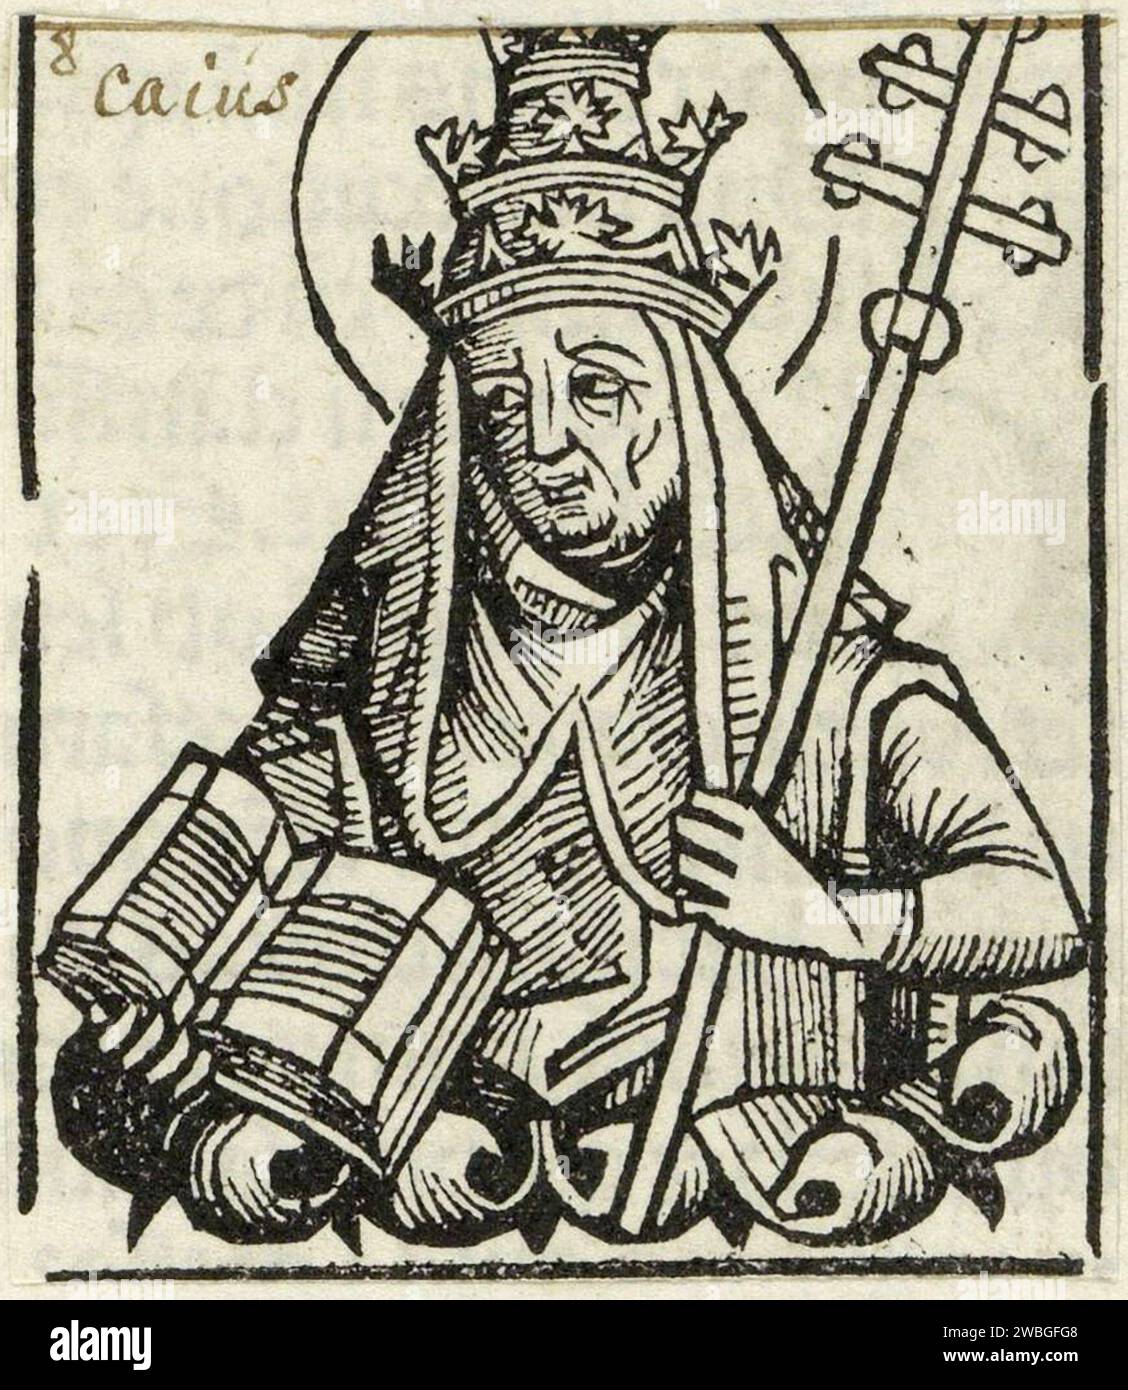 An 1580 engraving of Pope Caius who was pontiff from AD283-AD296. He was the 28th pope. According to legend he was martyred by beheading. Stock Photo